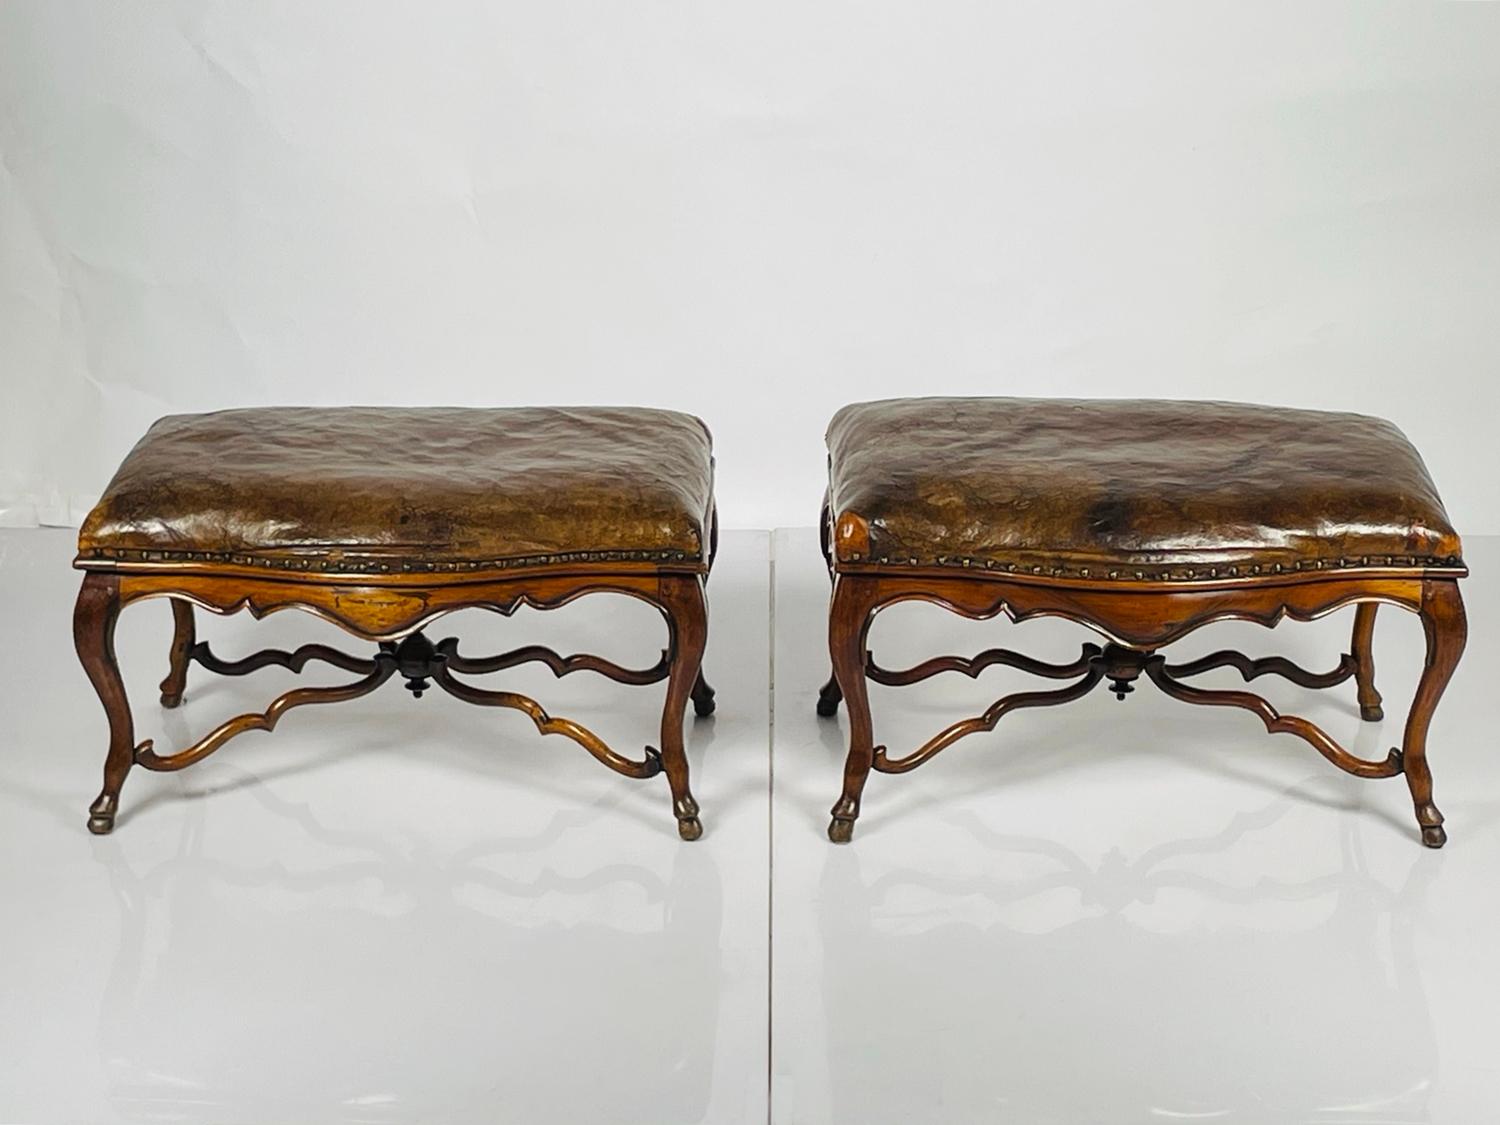 Introducing our exquisite Pair of Antique Benches in Mahogany & Leather, crafted with utmost precision and elegance in the heart of France. This stunning duo showcases the perfect blend of timeless beauty and unmatched craftsmanship, adding a touch